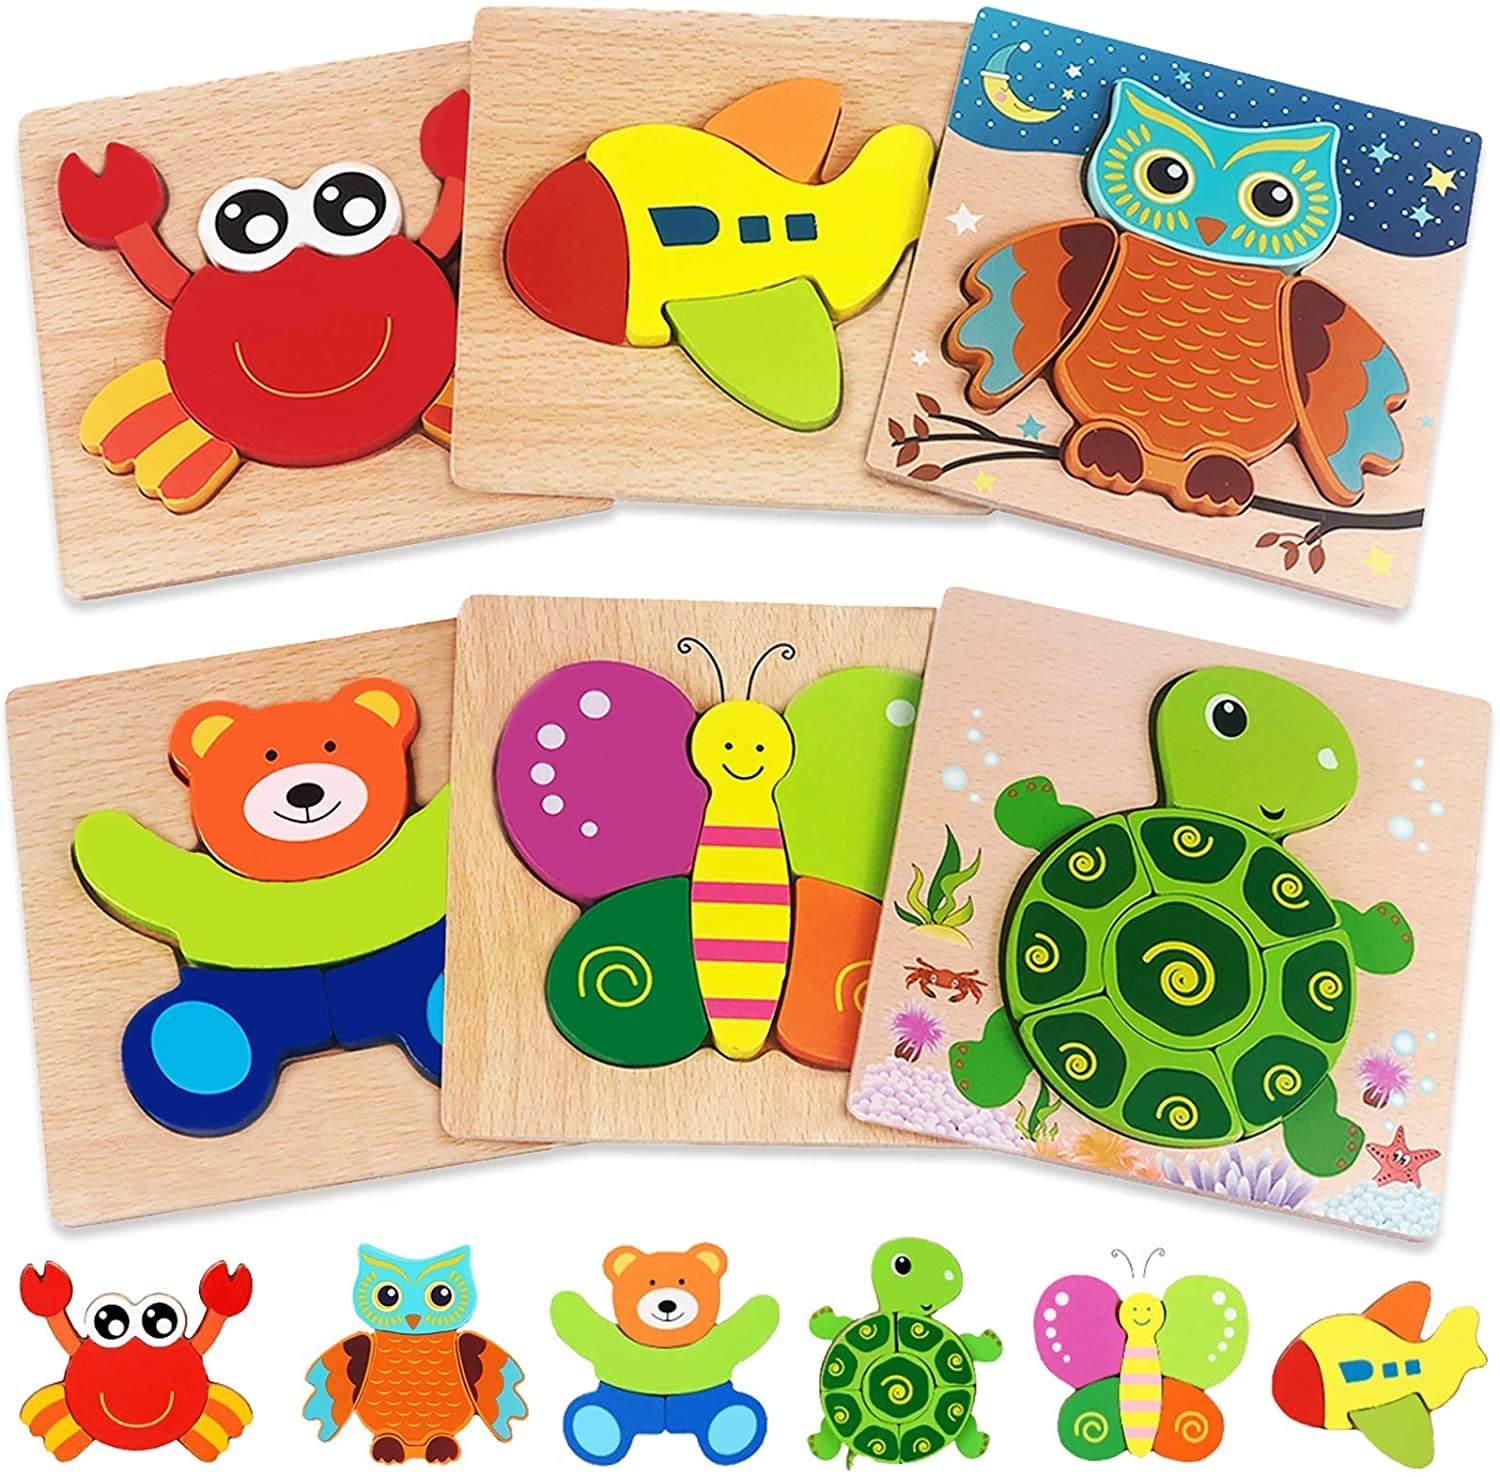 Hrayipt Store Wooden Puzzles for Toddlers